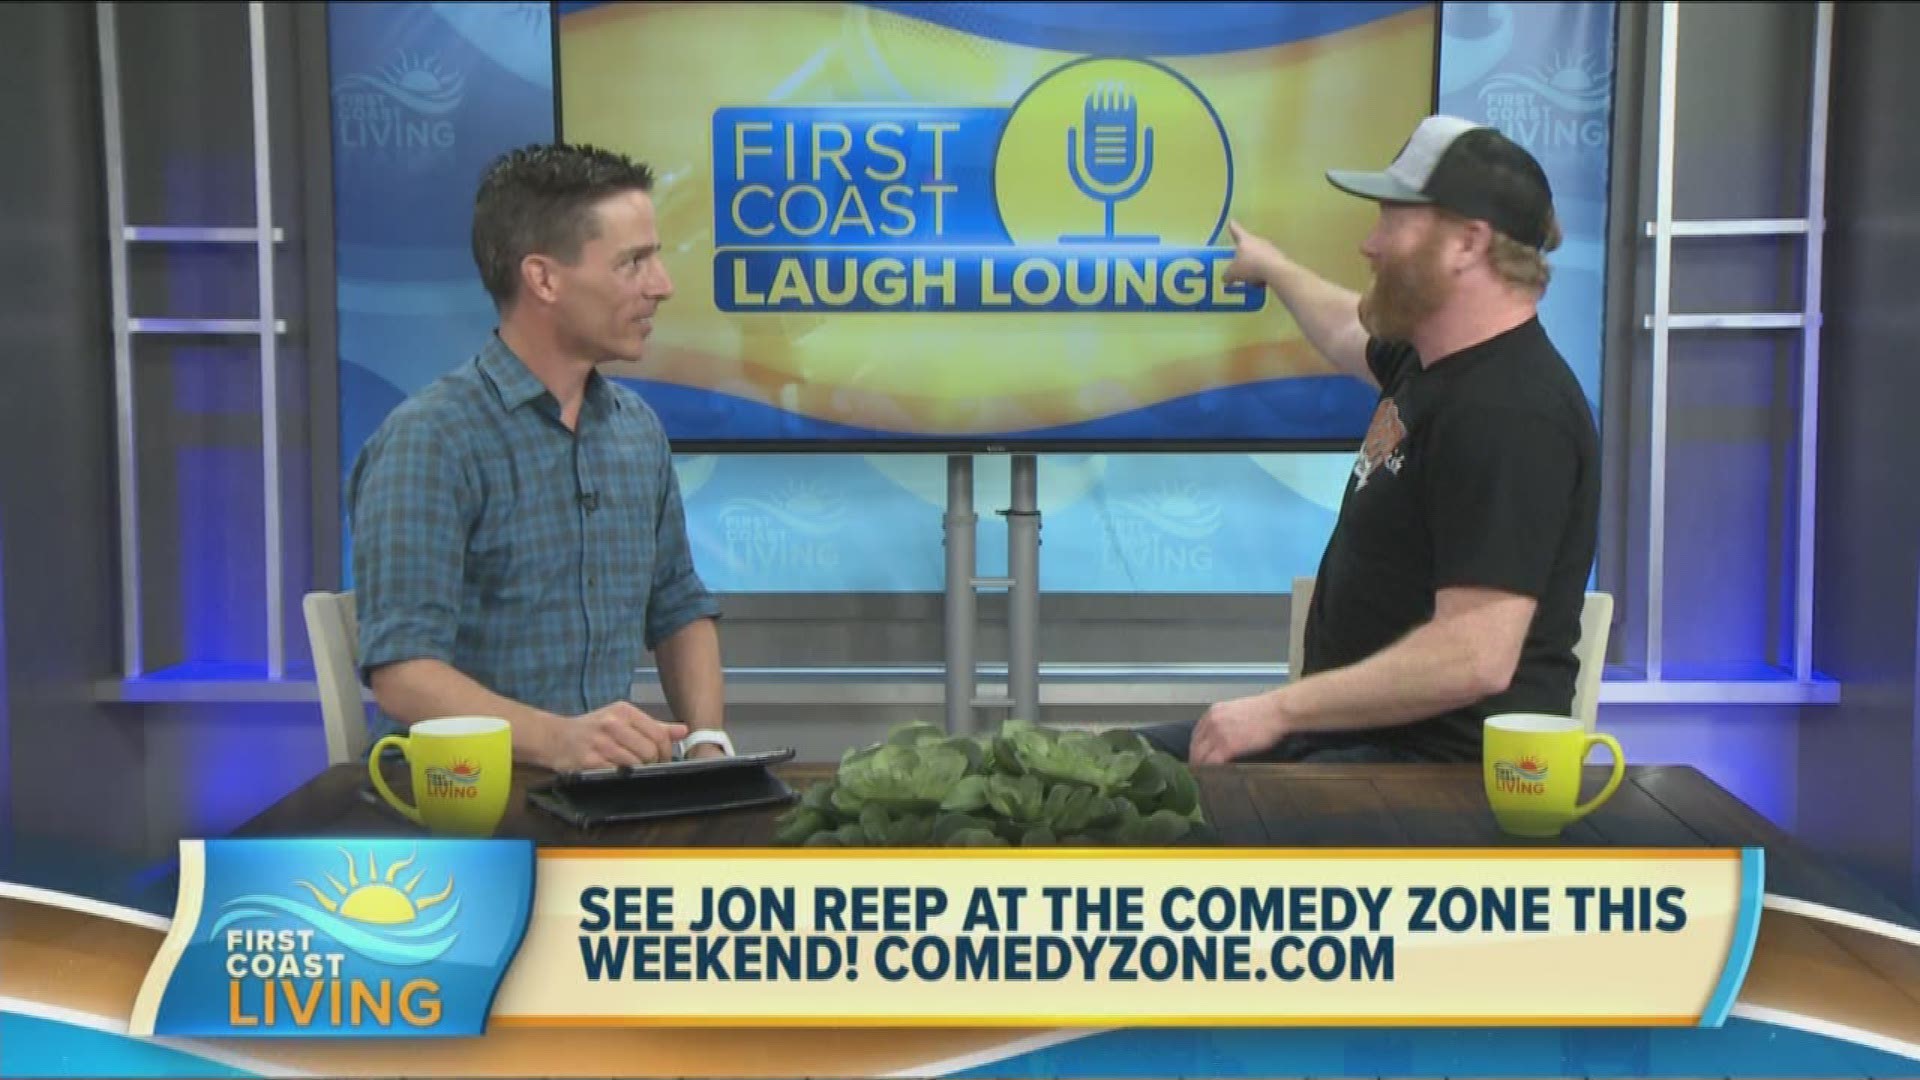 Get ready to laugh with comedian Jon Reep!